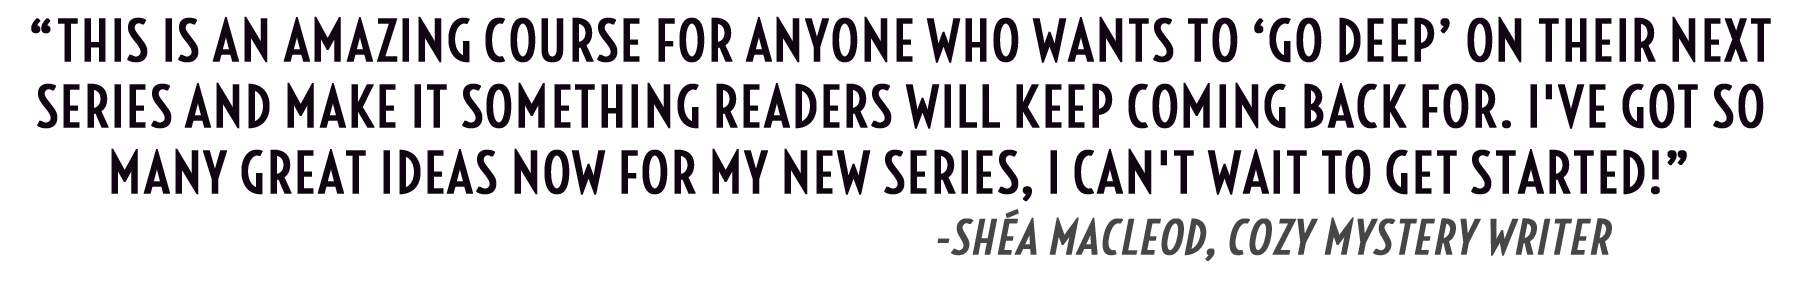 Supercharge Your Series Testimonial from Shea MacLeod